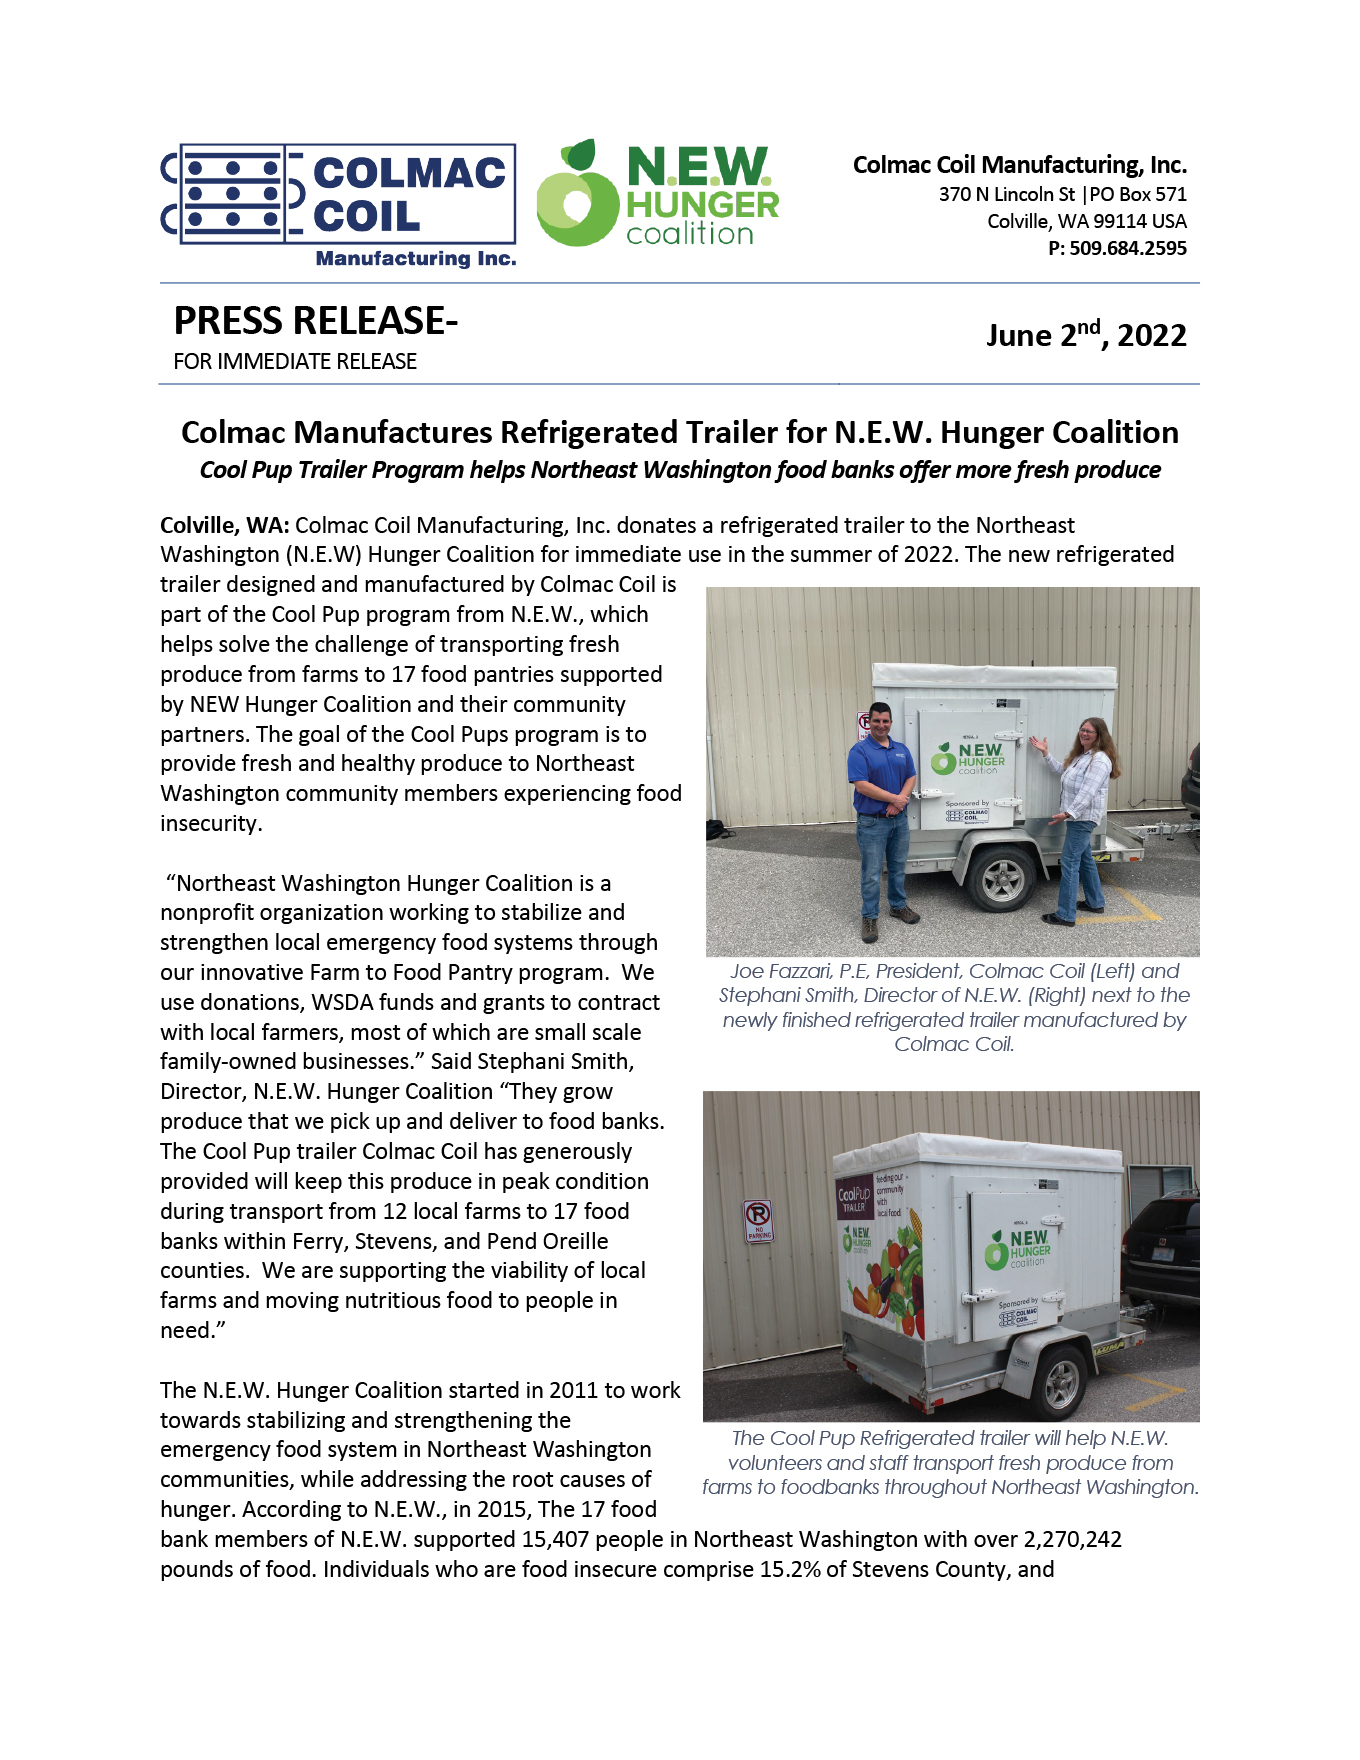 Colmac Coil Manufactures Refrigerated Trailer for N.E.W. Hunger Coalition